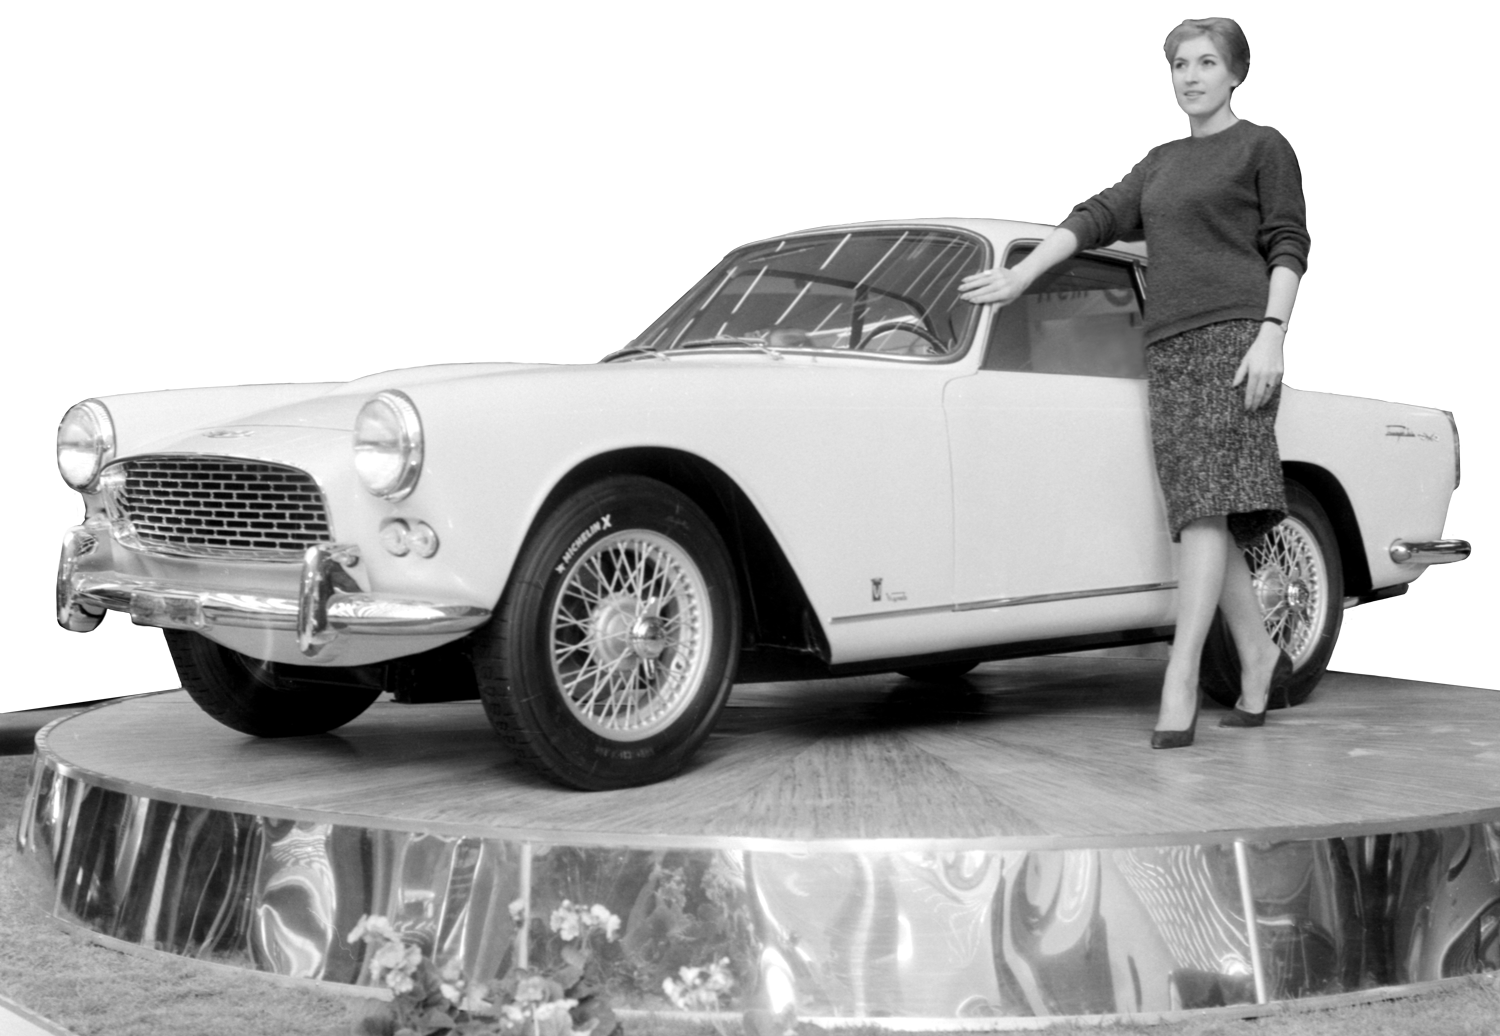 Italia #3 on the stand at the 1959 Turin Auto Salon. Photo ©REVS Institute. Used with permission.